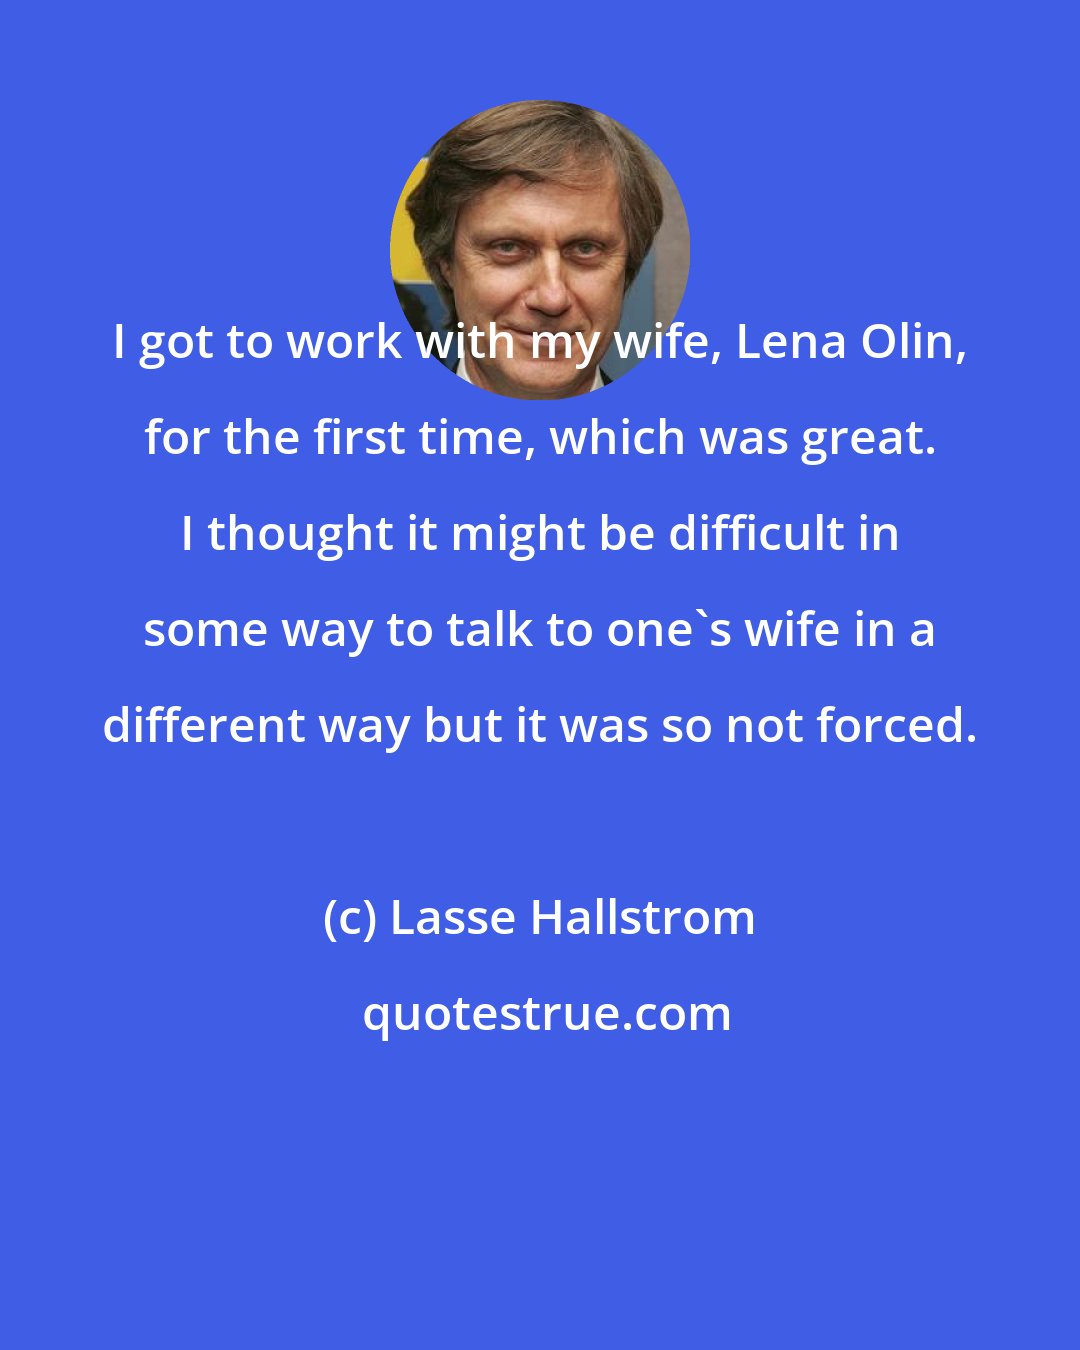 Lasse Hallstrom: I got to work with my wife, Lena Olin, for the first time, which was great. I thought it might be difficult in some way to talk to one's wife in a different way but it was so not forced.